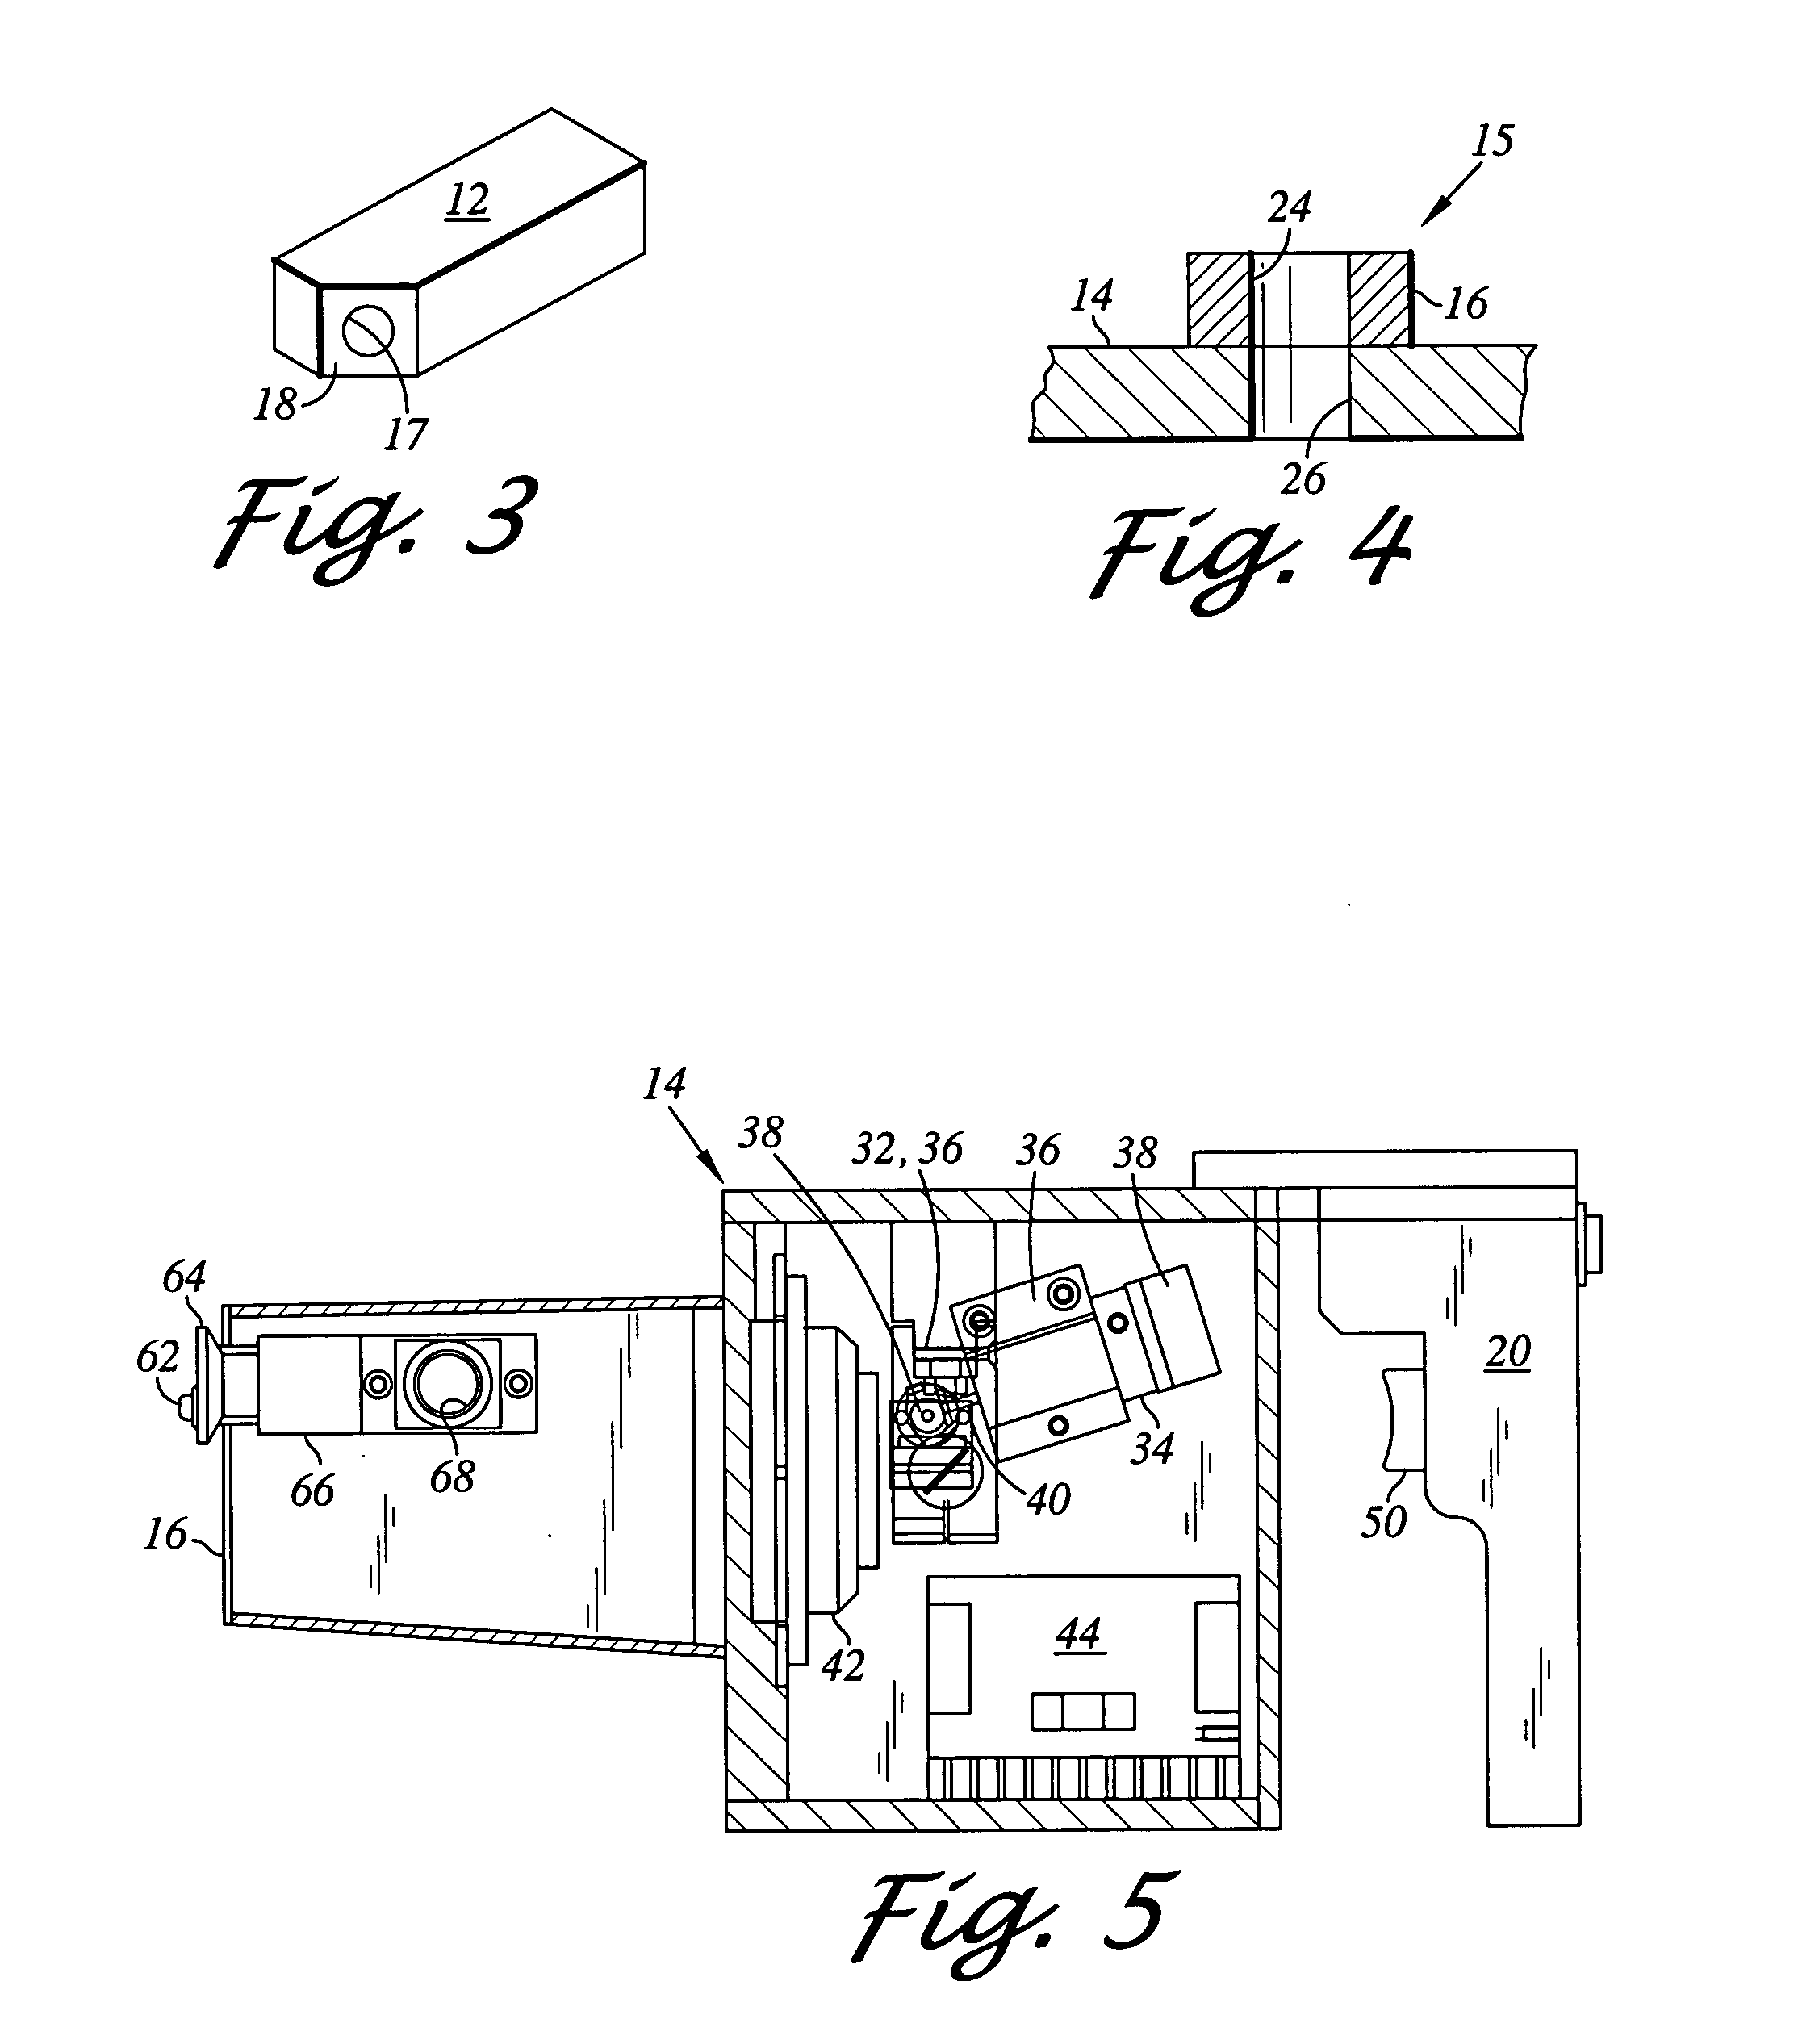 Method and apparatus for laser inscription of an image on a surface